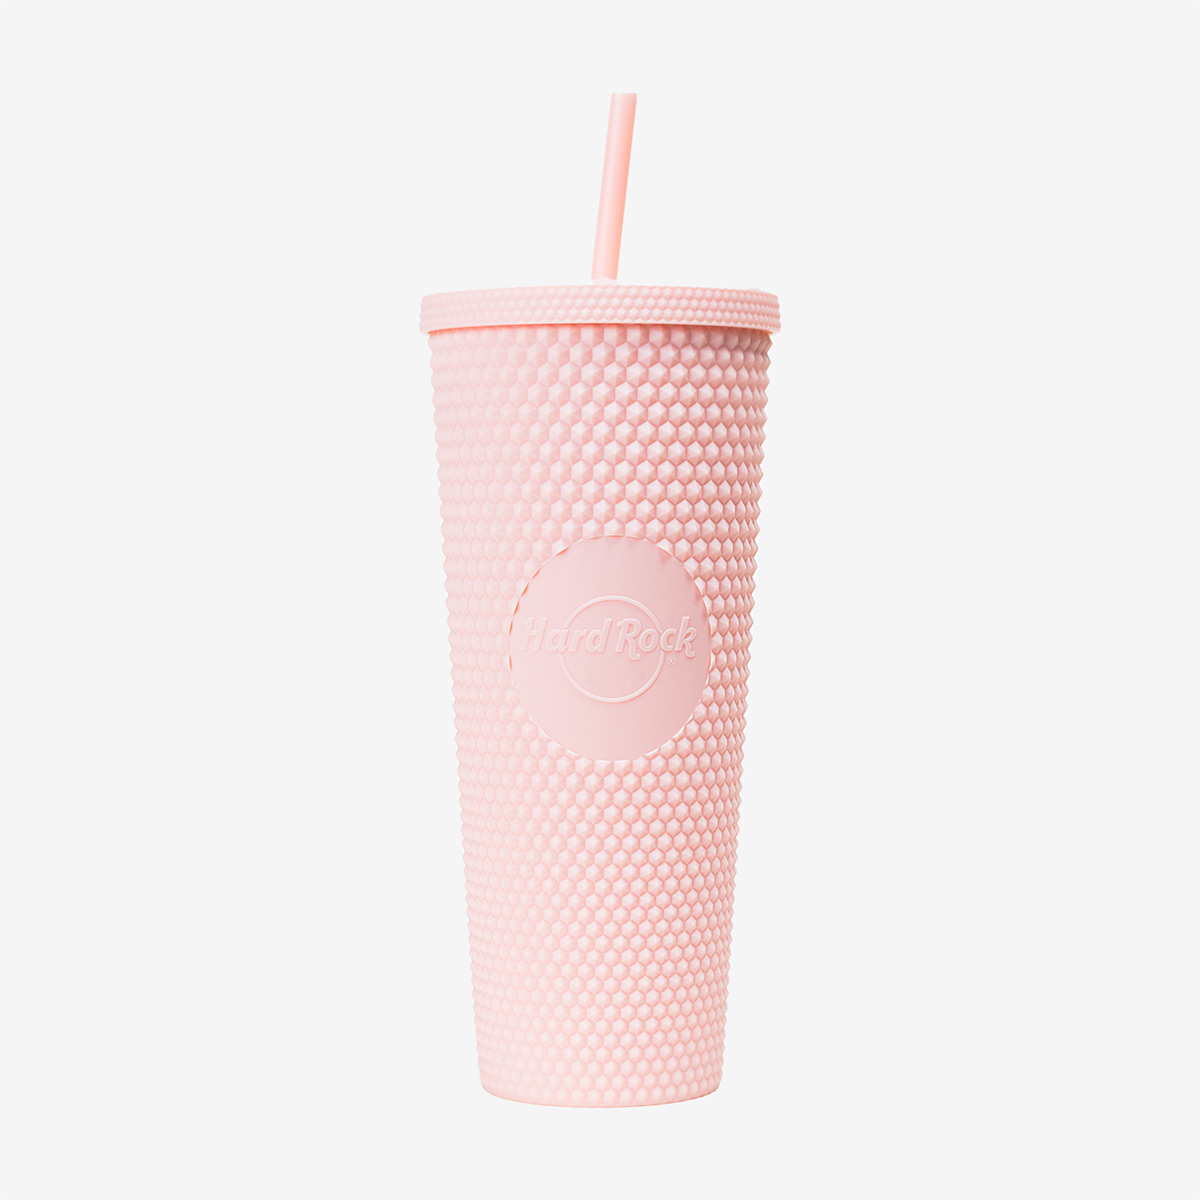 Hard Rock Pop of Color Tumbler with Straw in Pink 24oz image number 1